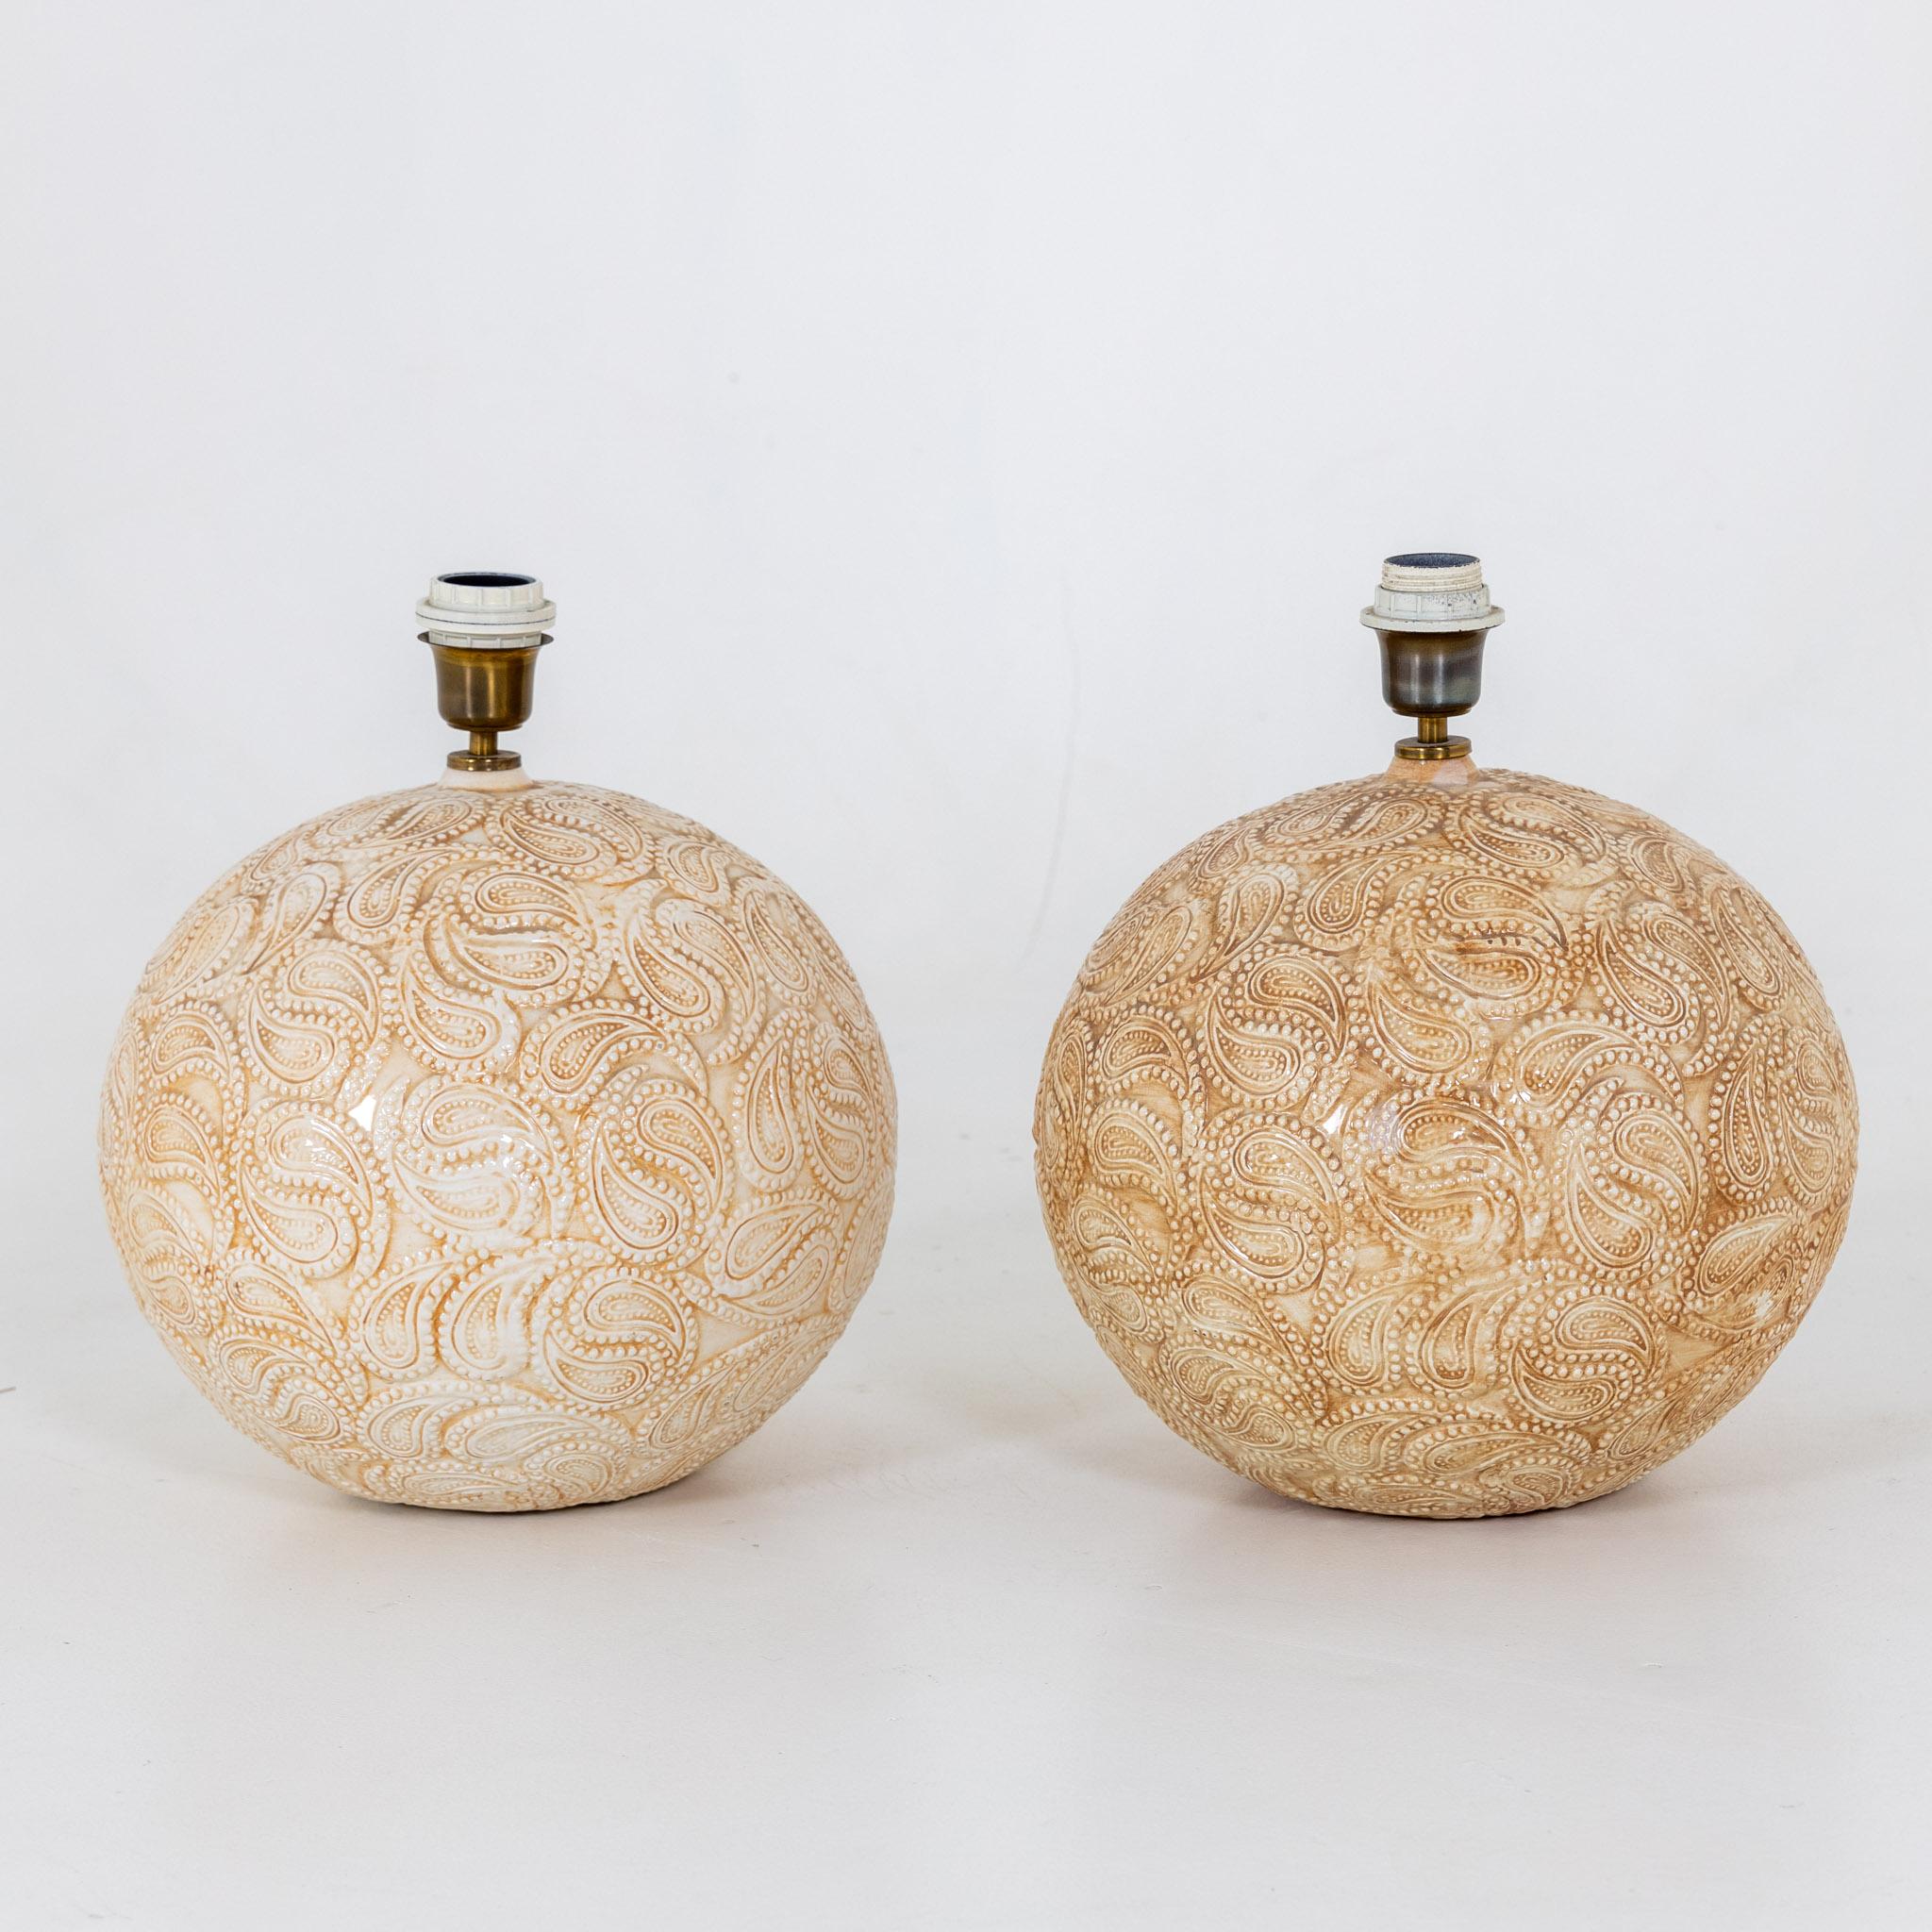 Pair of table lamps with spherical bodies of glazed ceramic and paisley pattern on the wall.